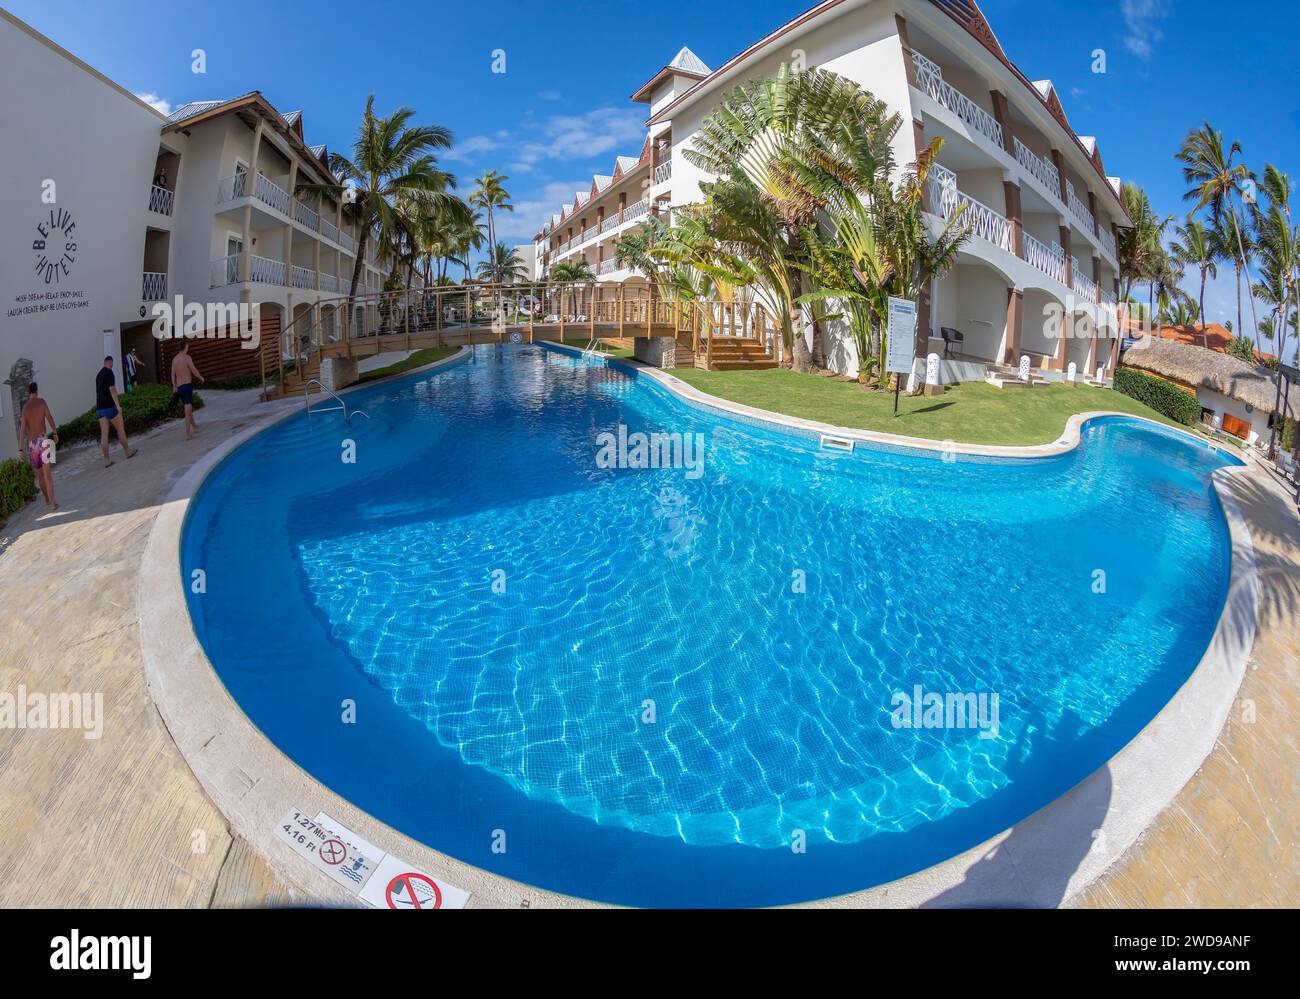 PUNTA CANA, DOMINICAN REPUBLIC - MARCH 11, 2020: Holiday resort BE LIVE at the Dominican Republic, a island that are part of the Greater Antilles arch Stock Photo